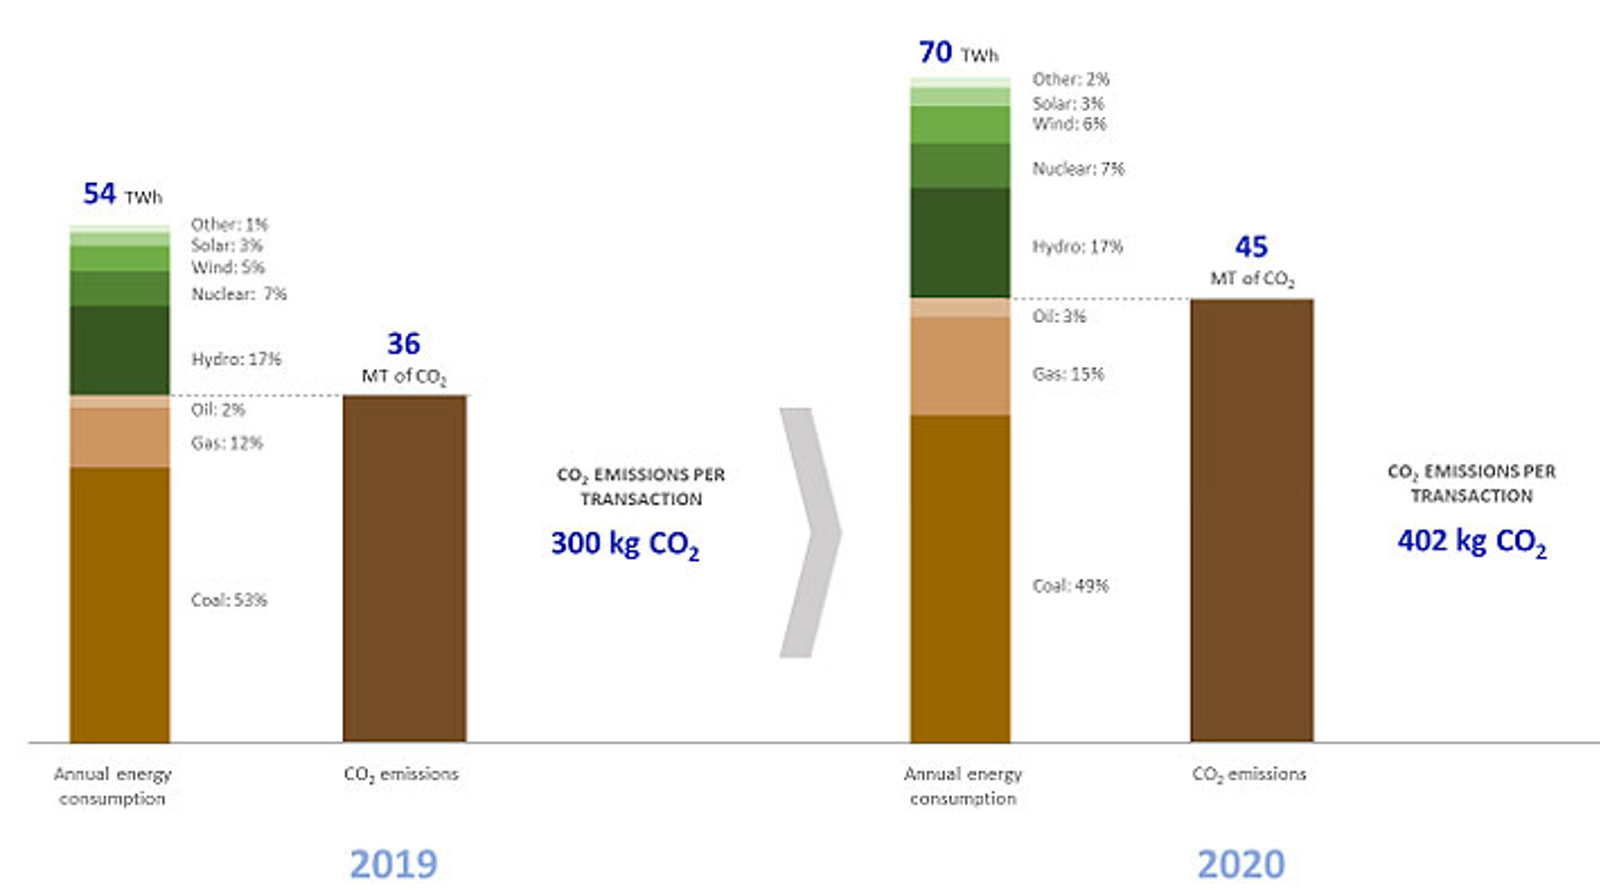 Bitcoin network carbon footprint 2019-2020, energy consumption by source